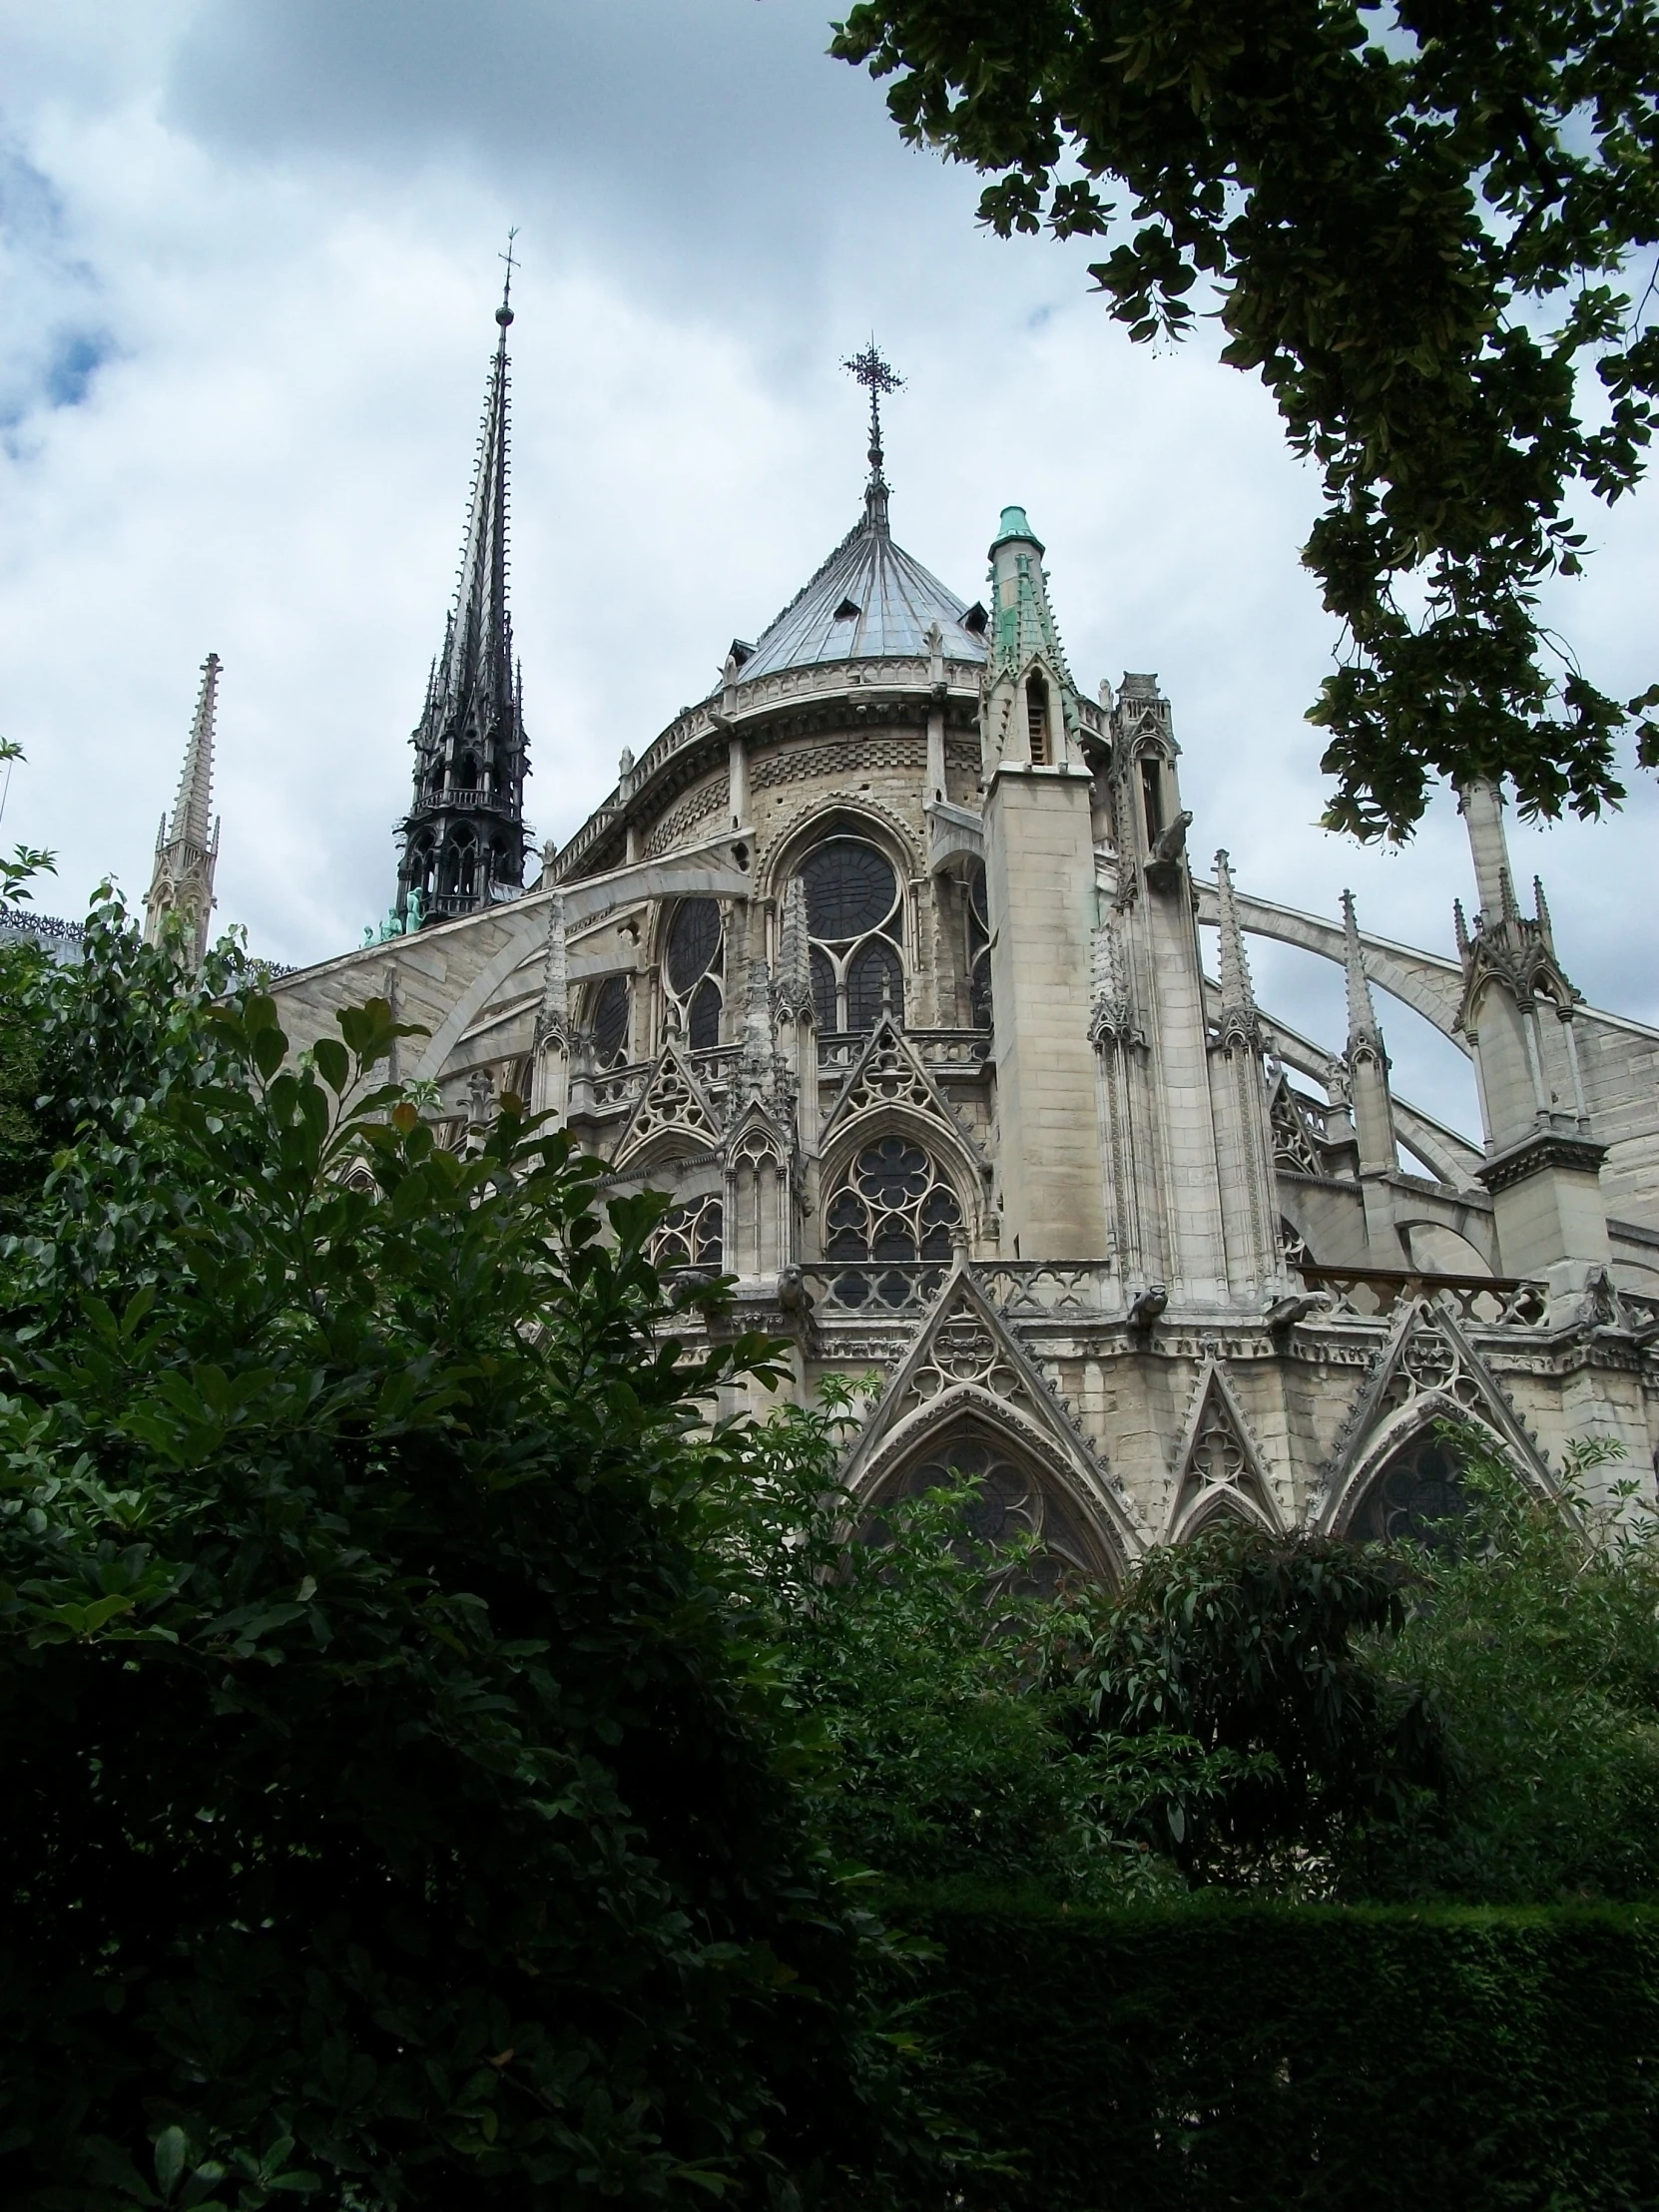 the steeples of a gothic style building, with a spires